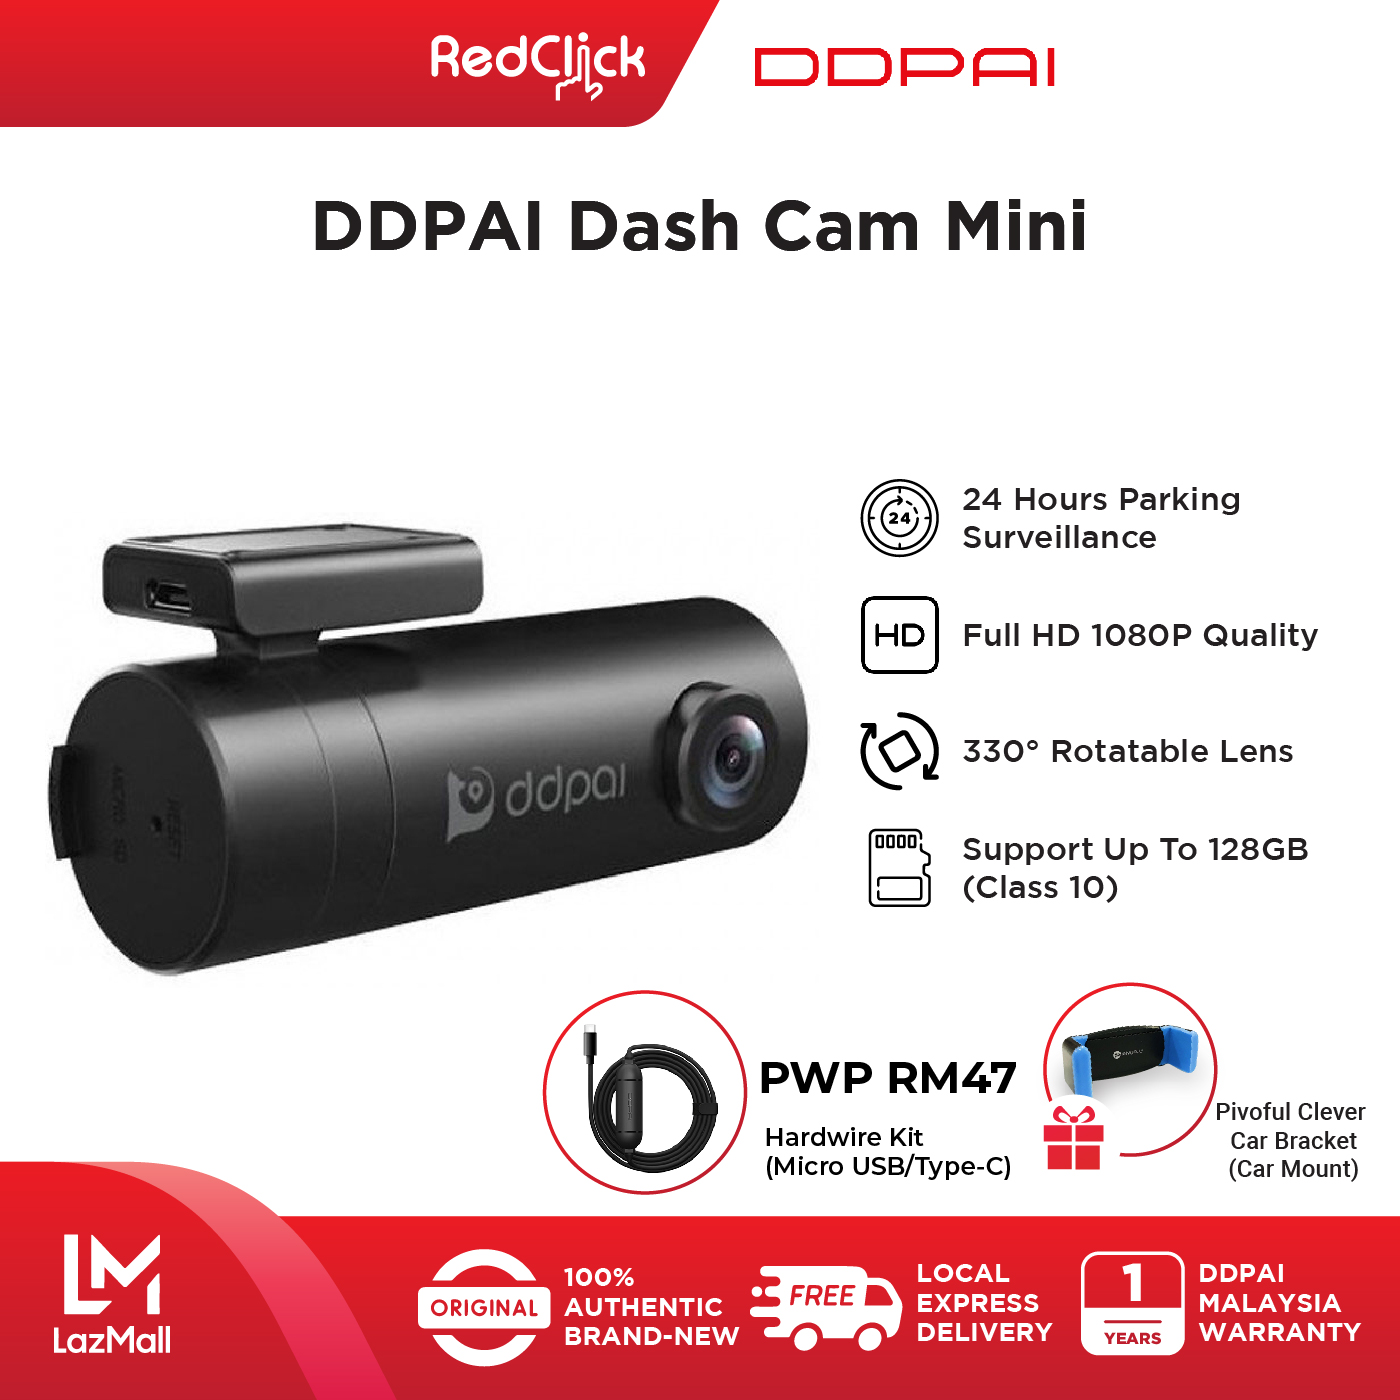 DDPAI Dash Cam Mini 1080P Resolution 24 Hours Parking Monitoring 330° Rotatable Lens Front and Rear Video Recording + Free Gift